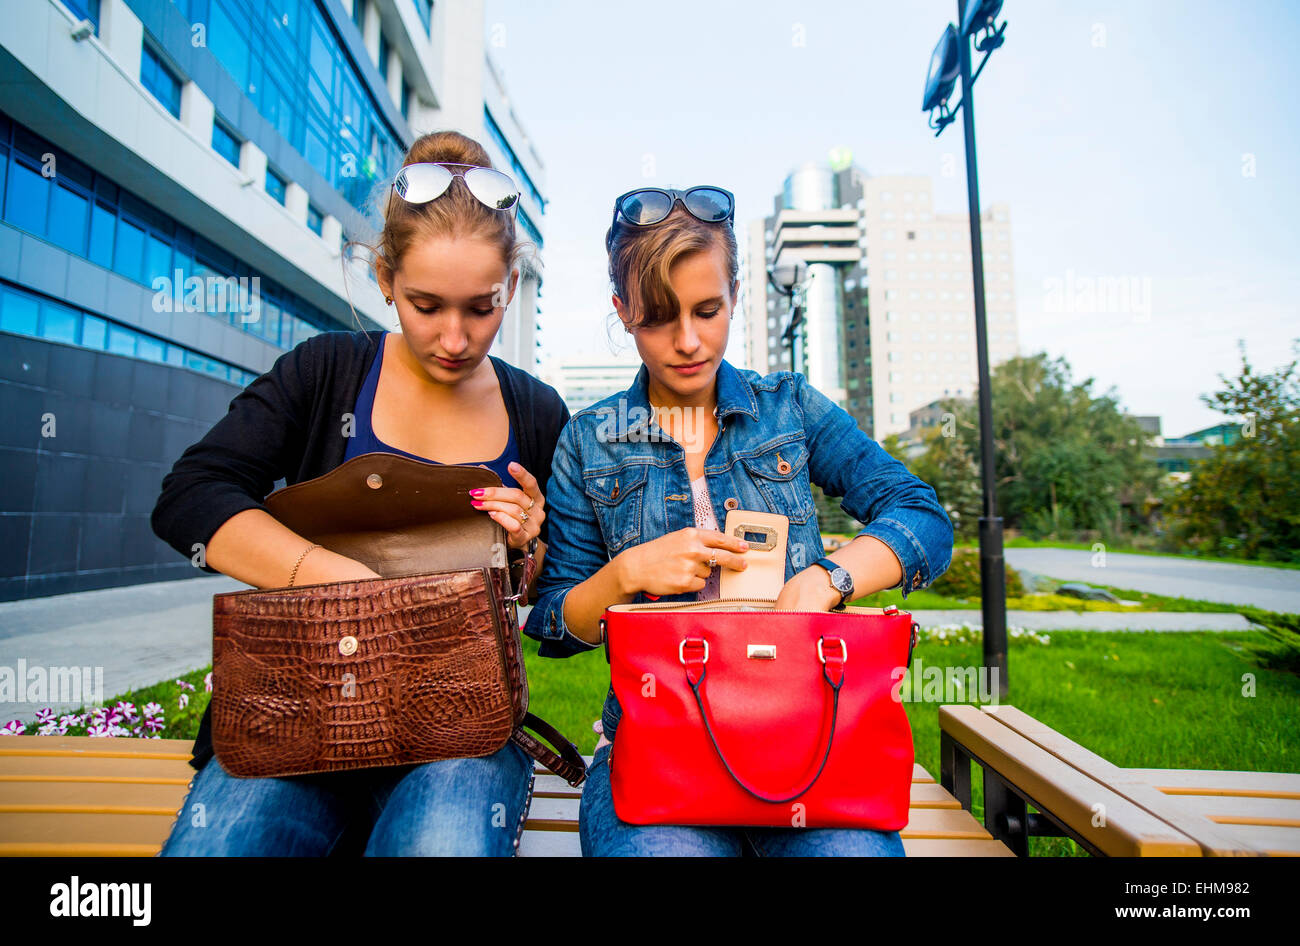 Caucasian women searching in purses on park bench Stock Photo